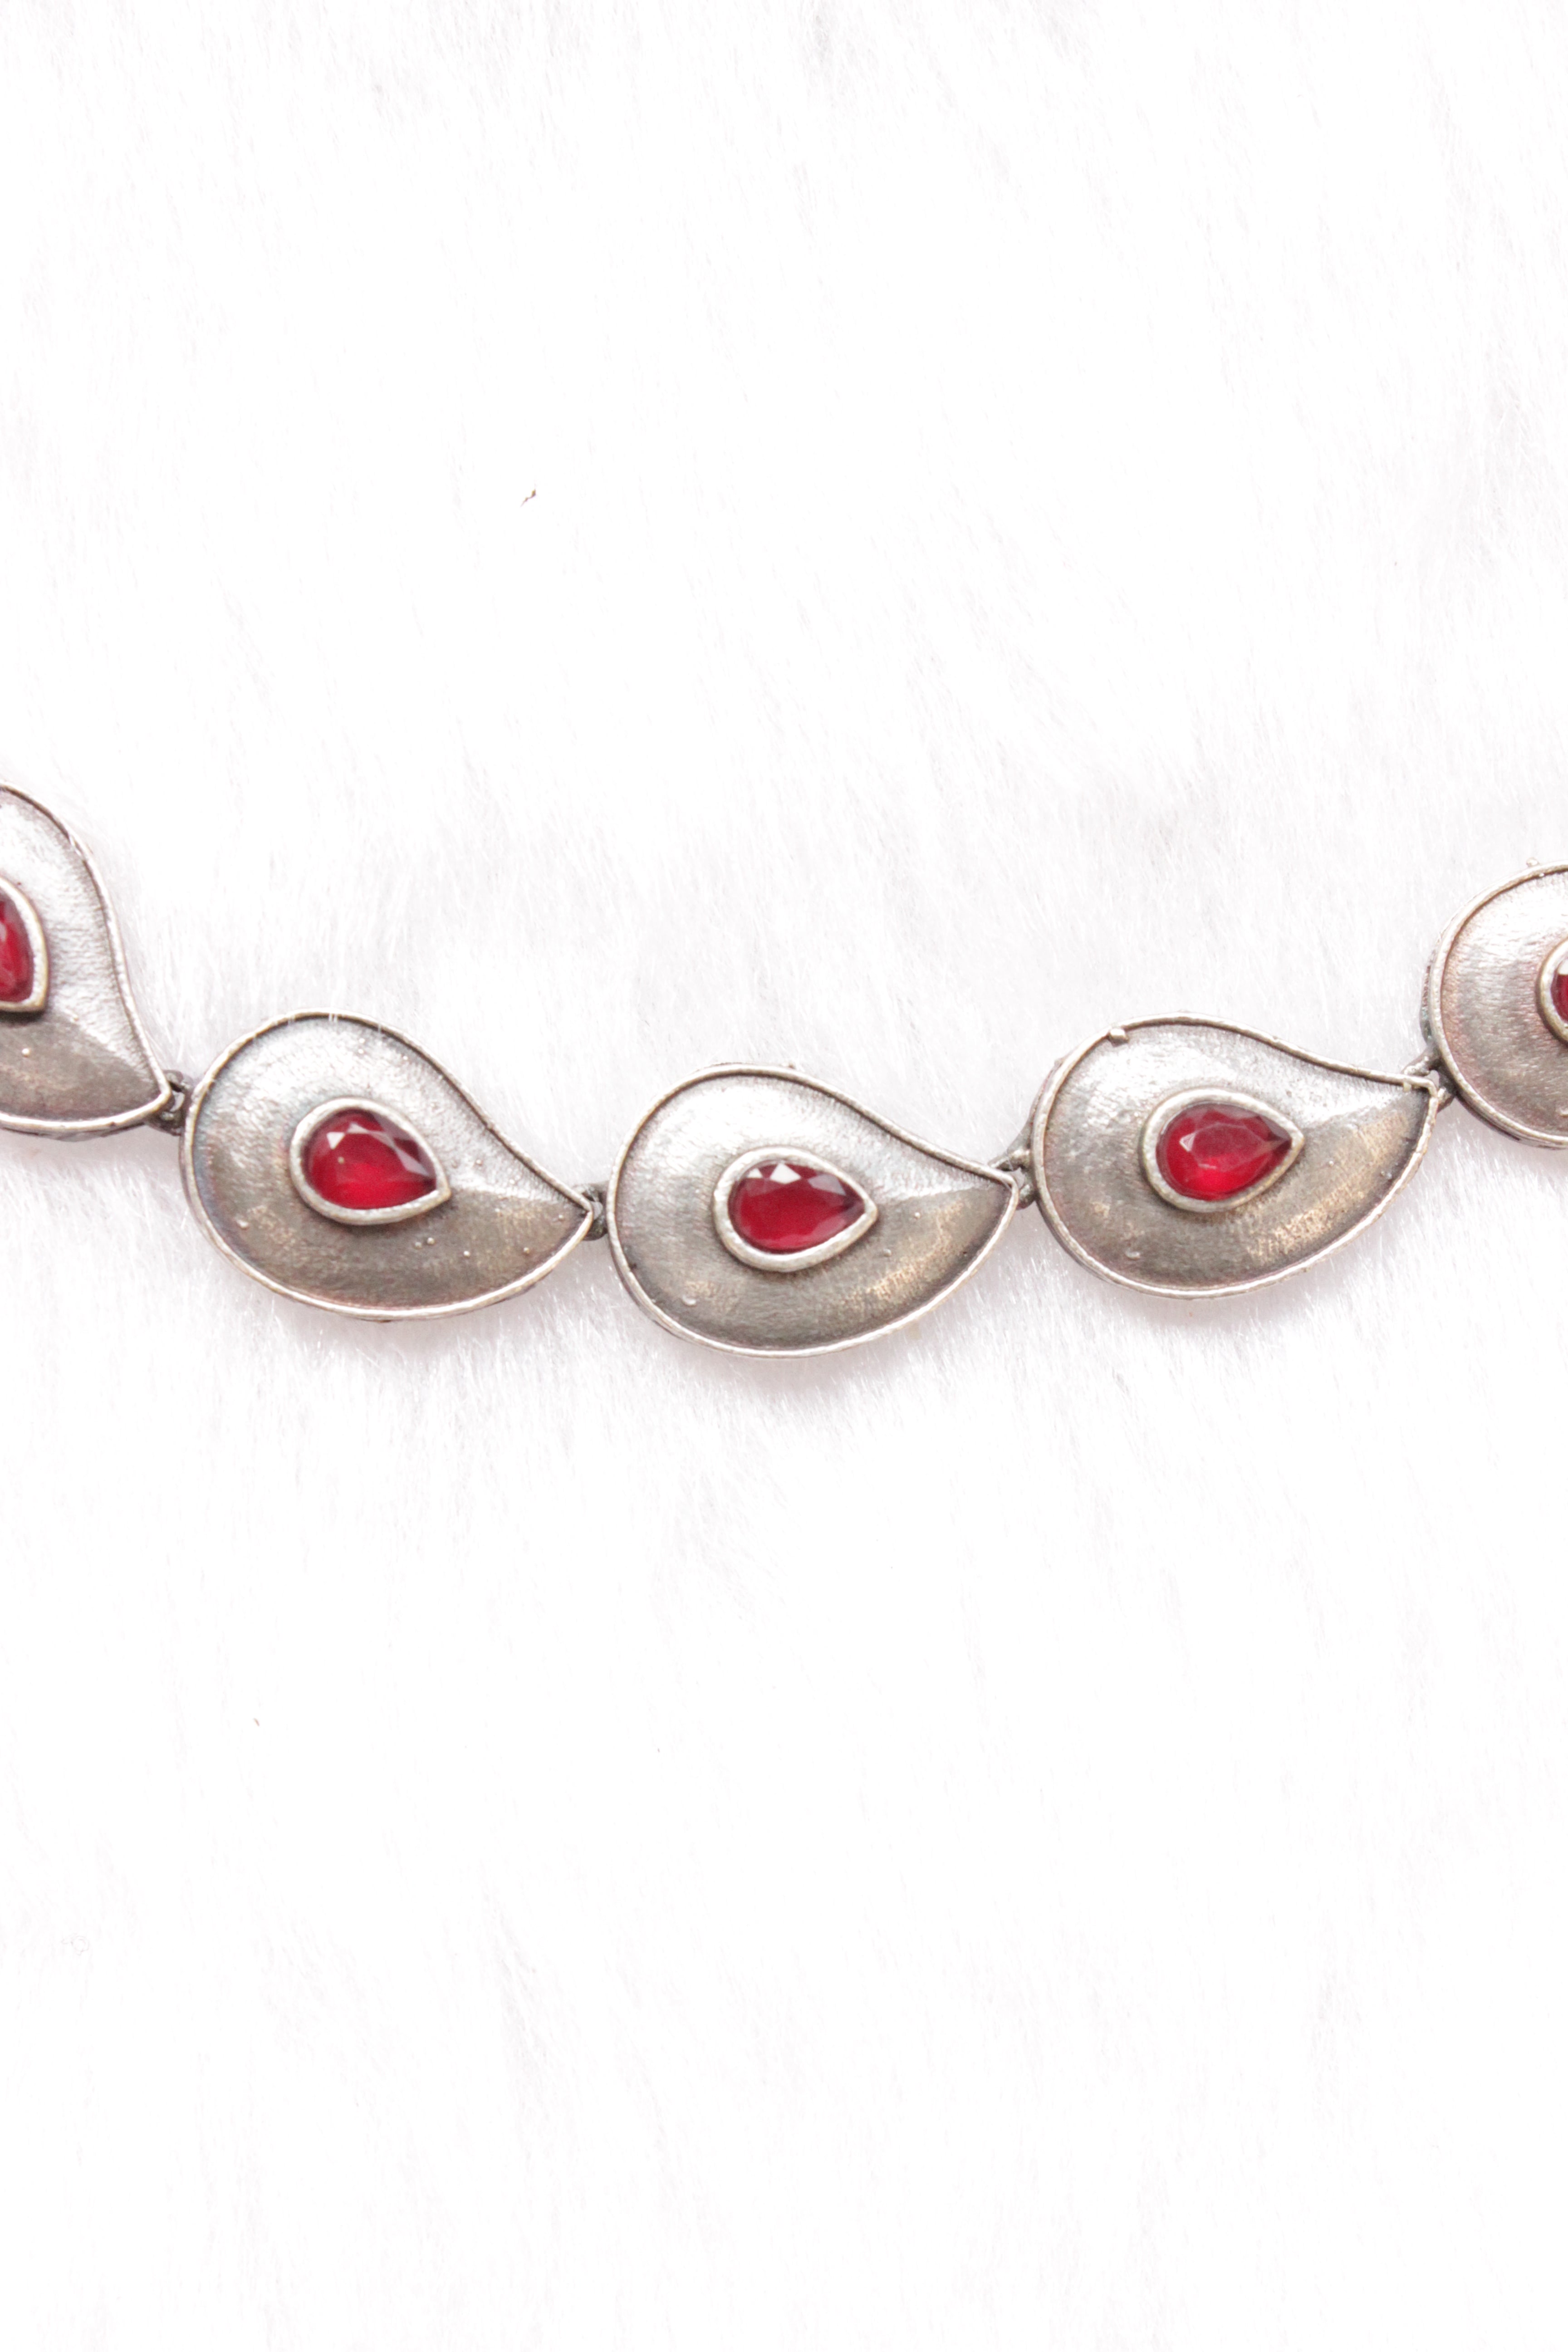 Red Center Stones Embedded Leaf Shaped Metal Charms Oxidised Finish Chain Necklace Set